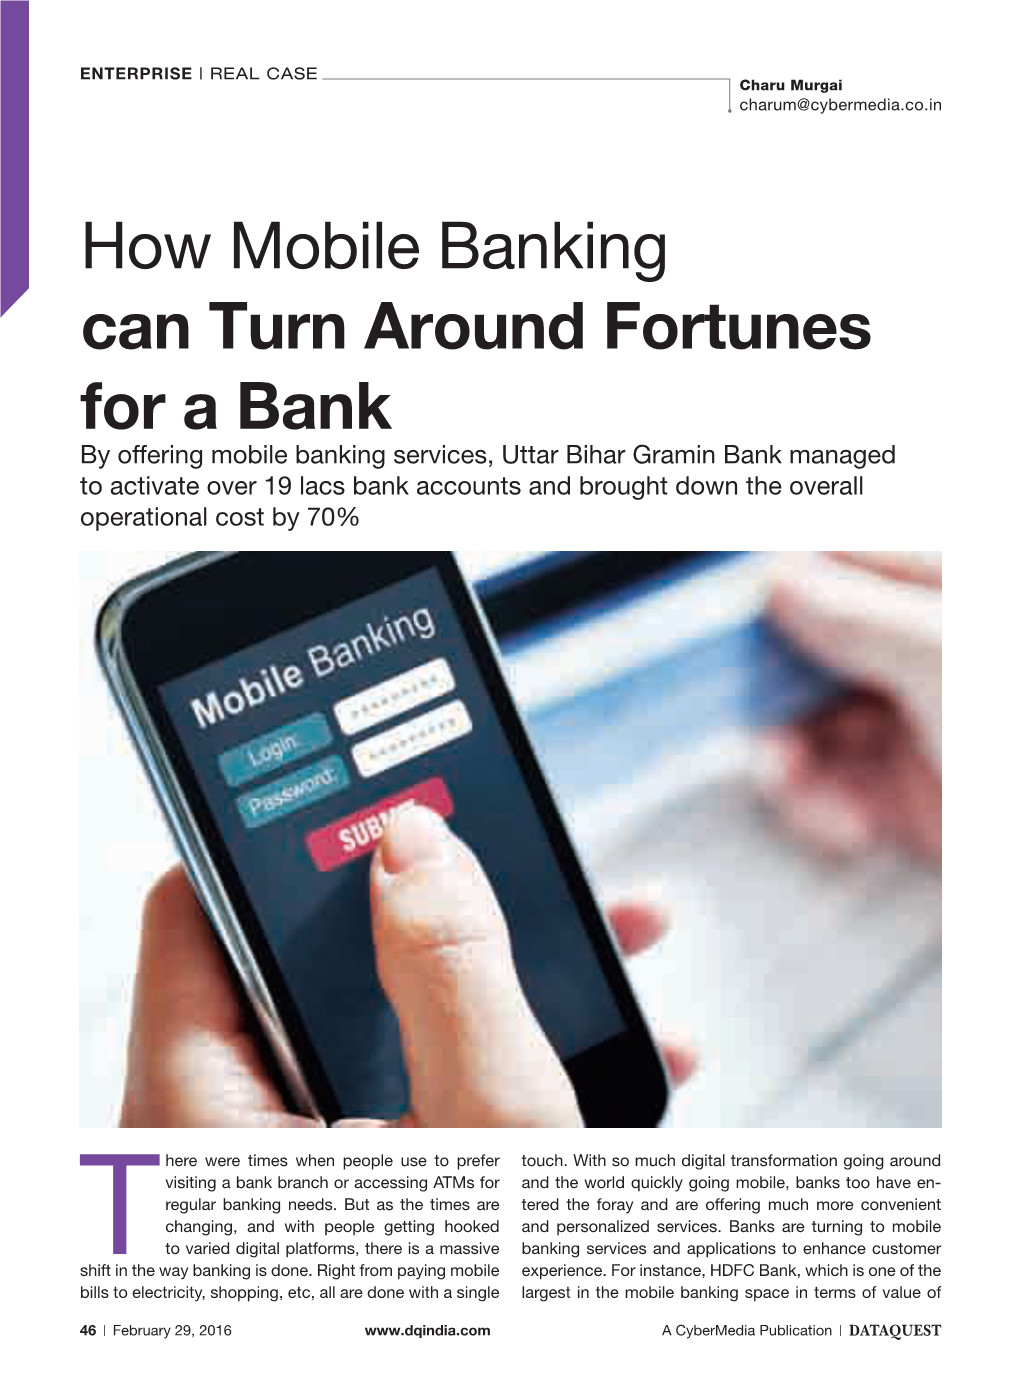 How Mobile Banking Can Turn Around Fortunes for a Bank